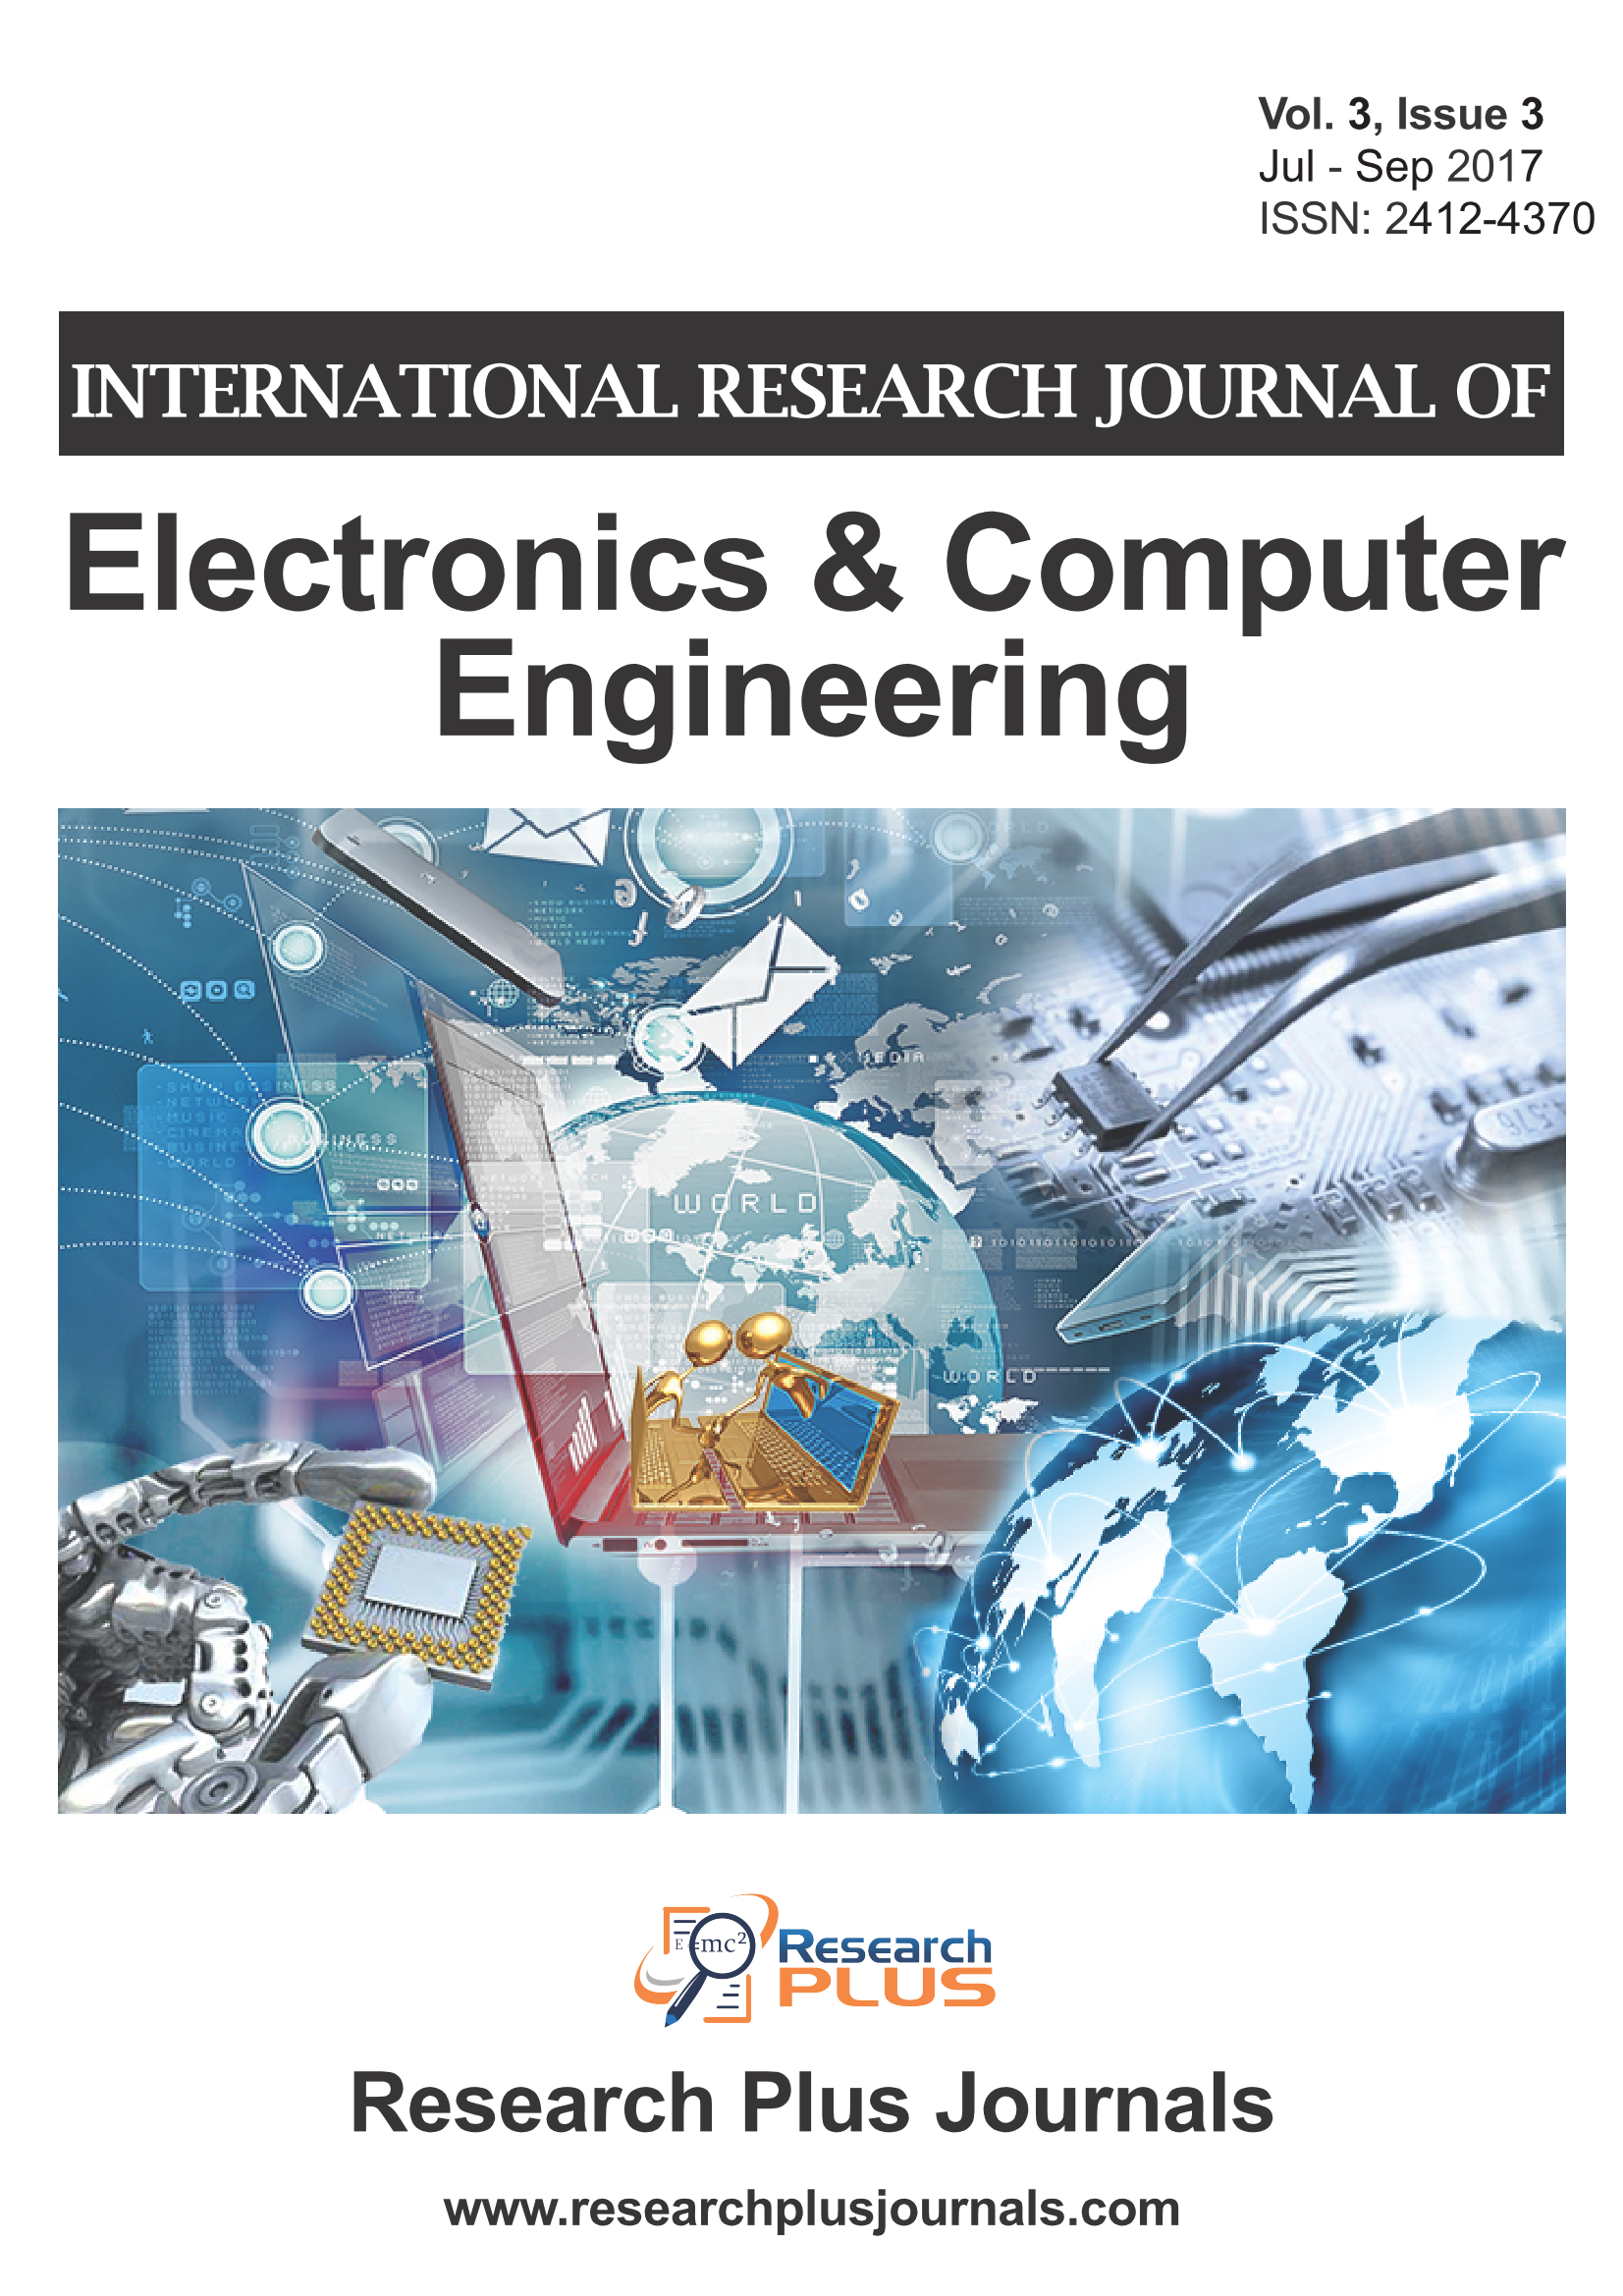 Volume 3, Issue 3, International Research Journal of Electronics & Computer Engineering (IRJECE) (Online ISSN : 2412-4370)